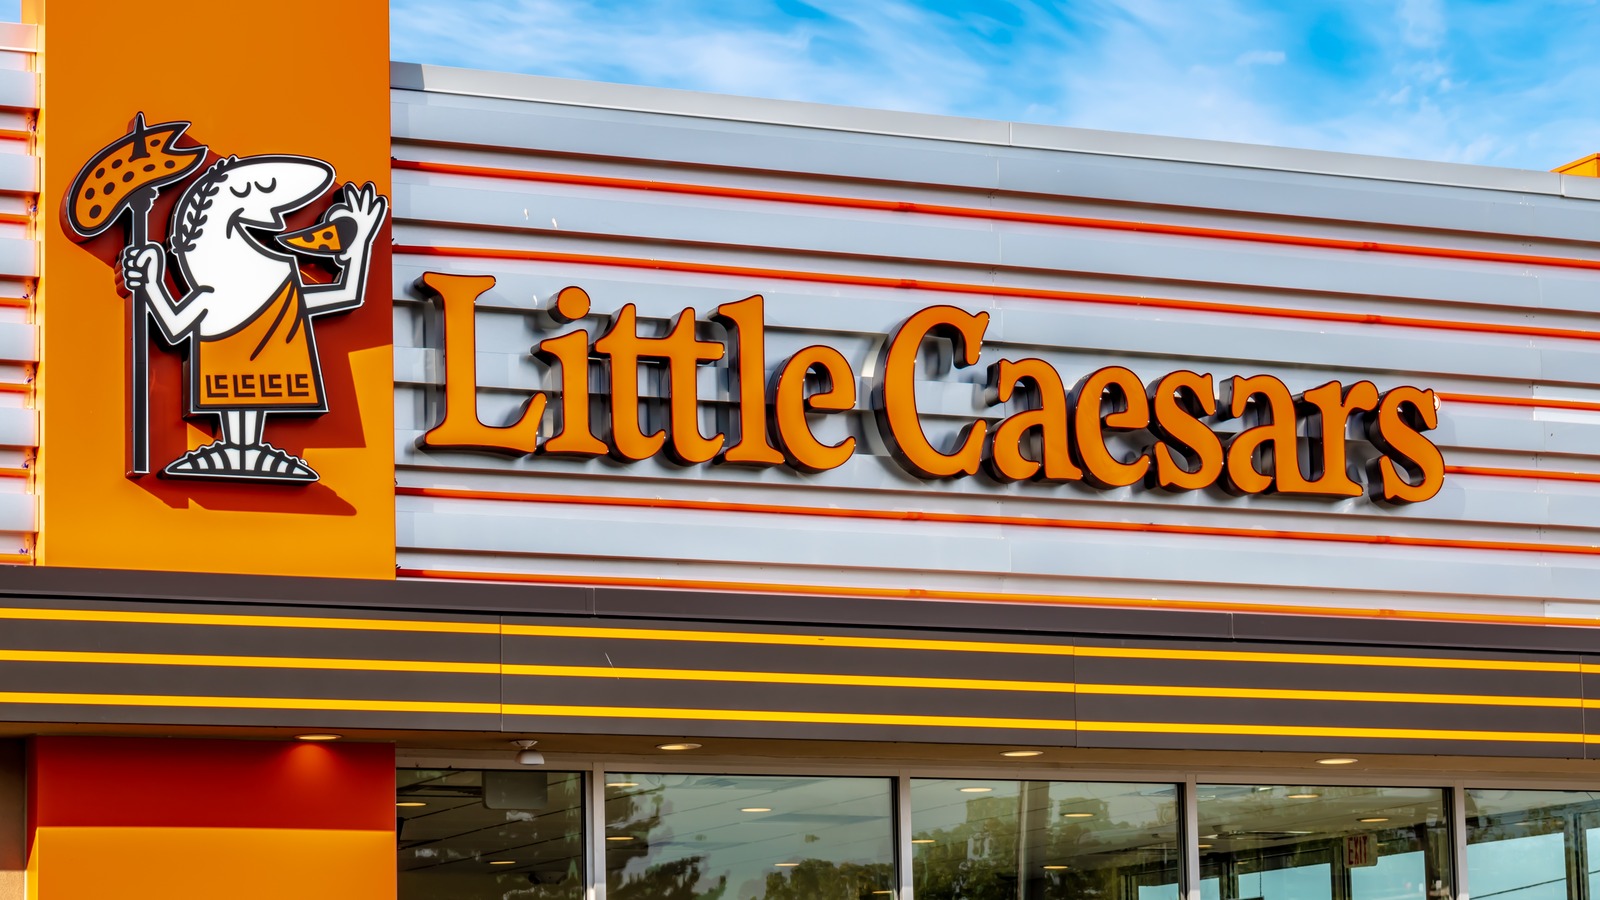  The Rise, Fall, And Rise Again Of Little Caesars 